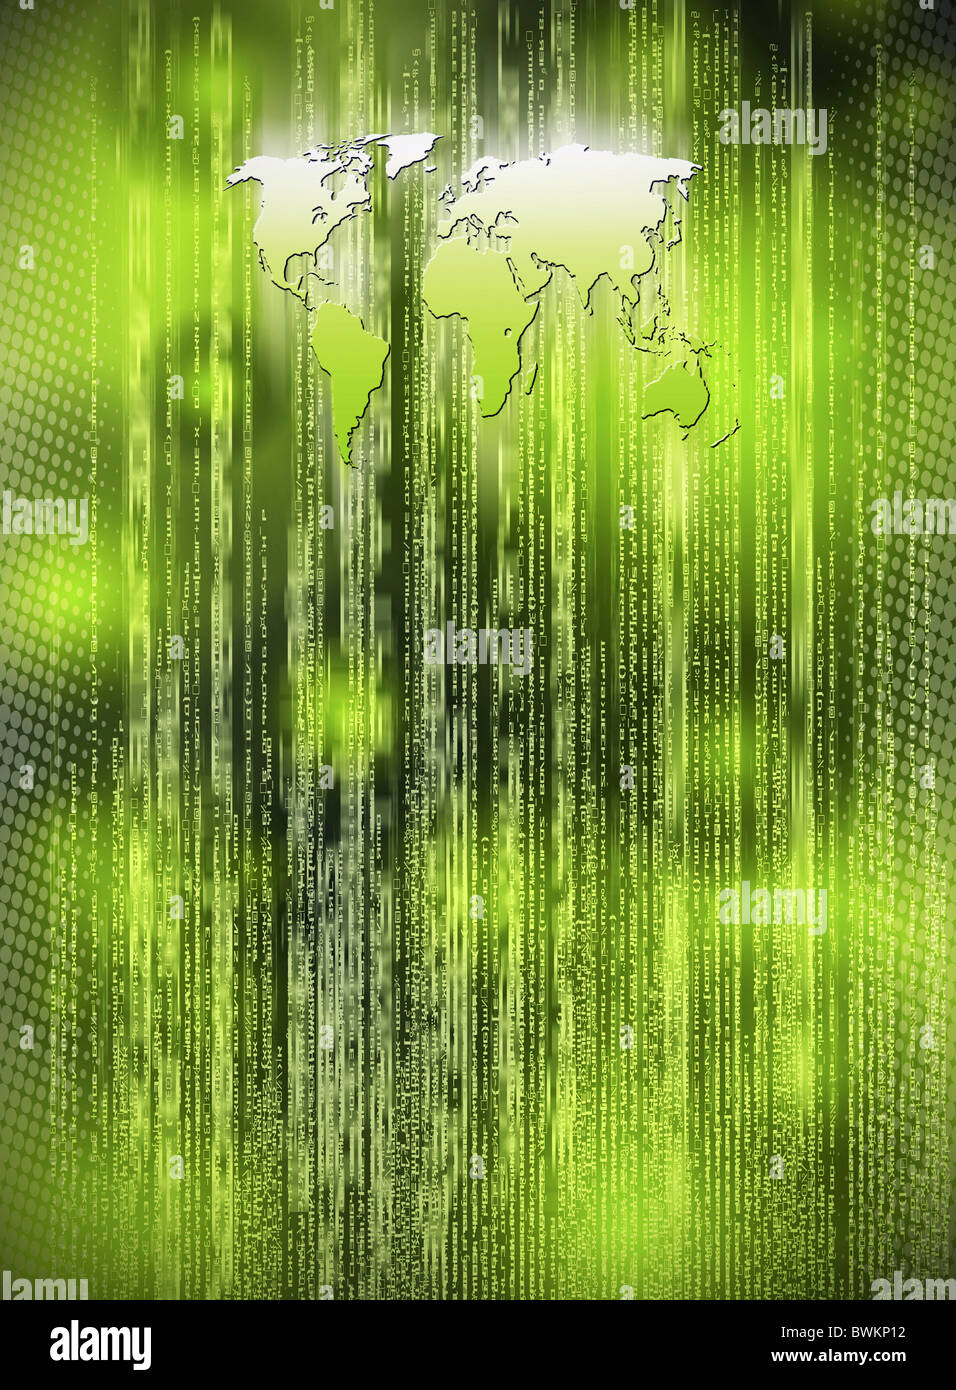 abstract background with world map Stock Photo